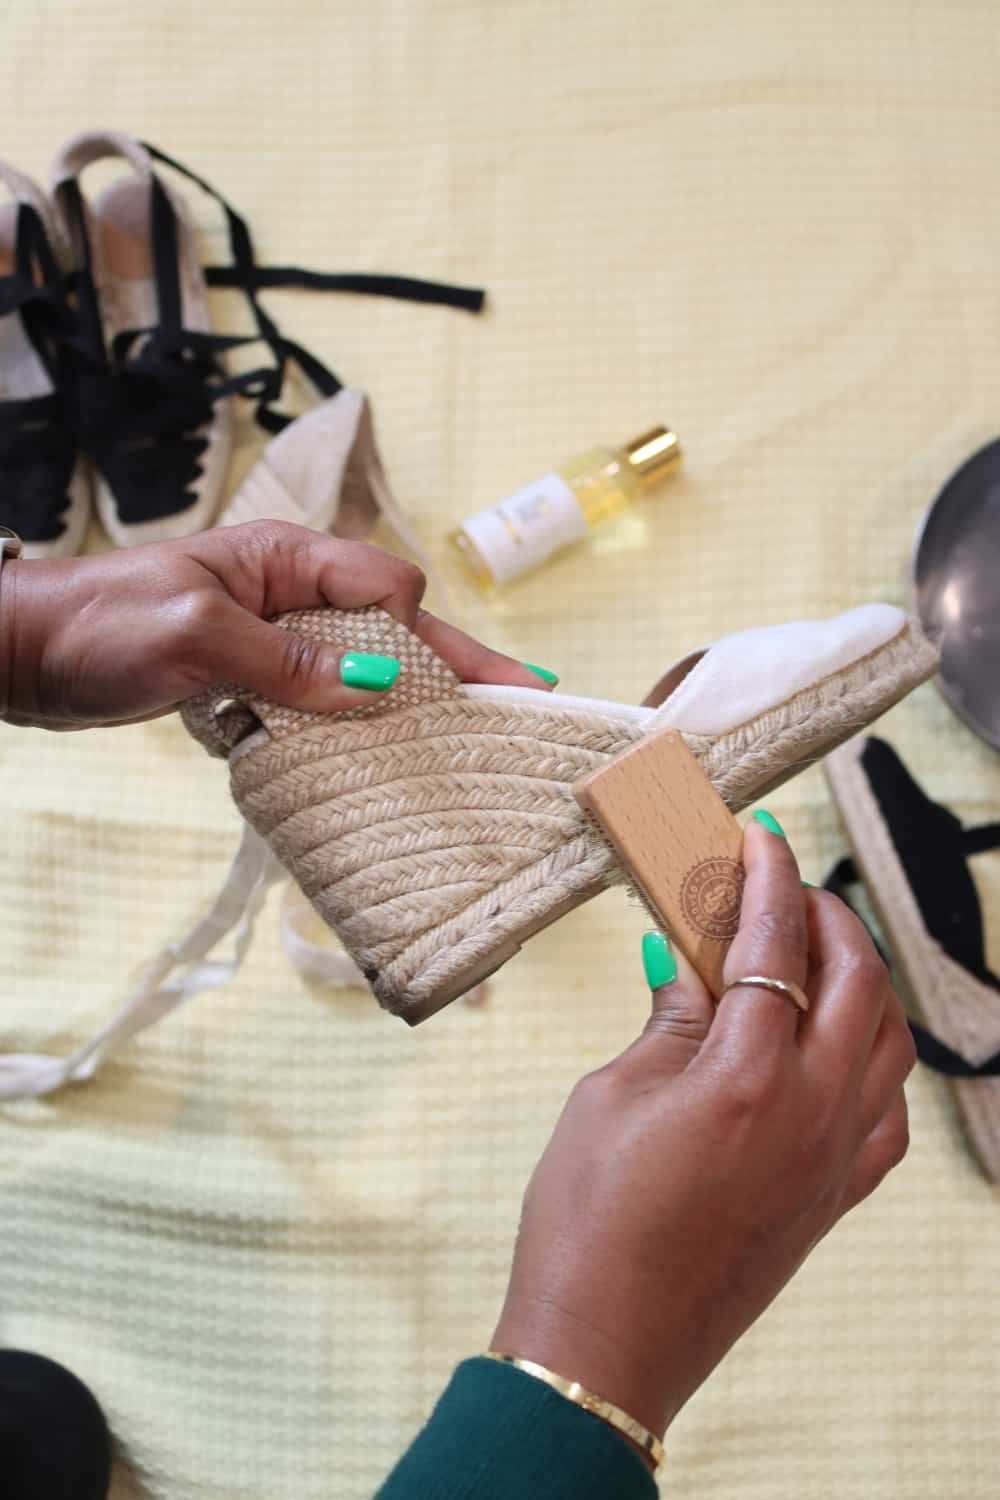 Cleaning espadrilles - step 3